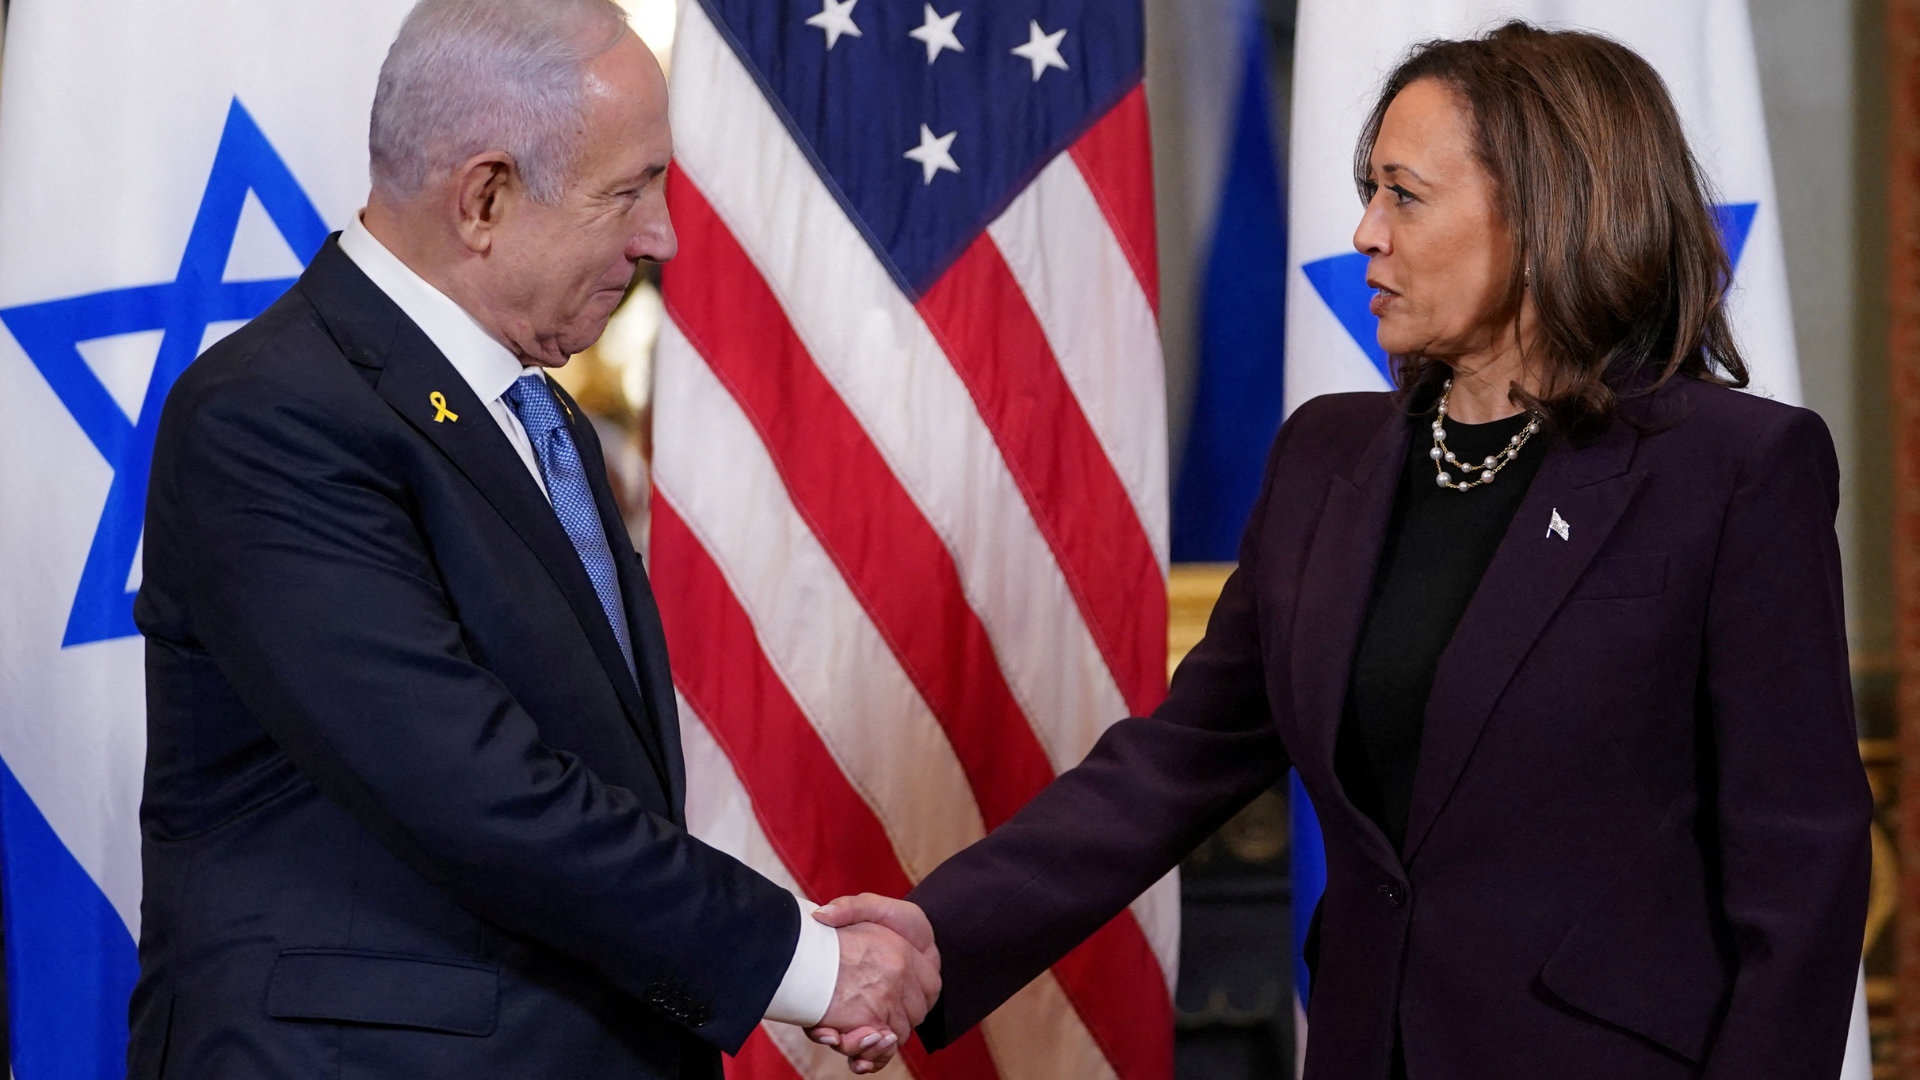 Harris Promises Not To Stay ‘Silent’ On Gaza After Netanyahu Meeting